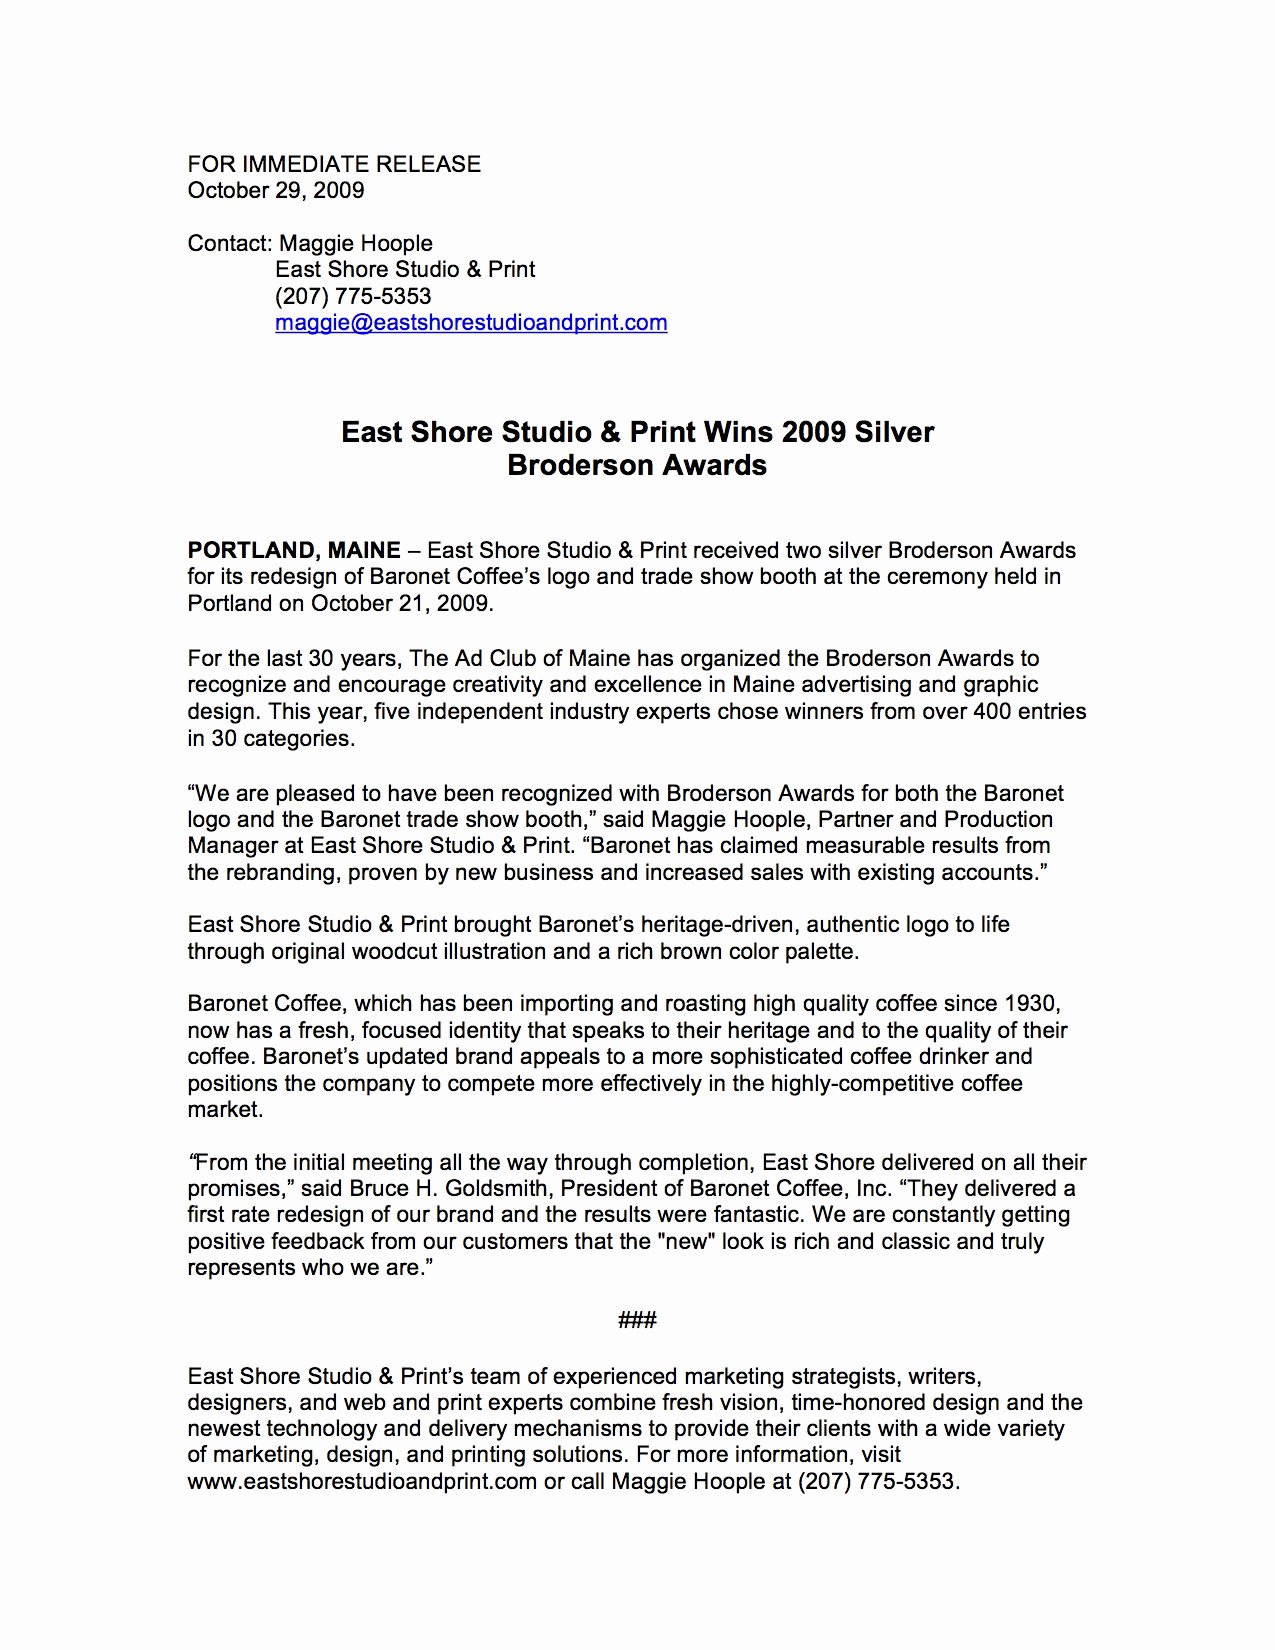 Press Release format Template Fresh 10 Best Of Grand Reopening Press Release format